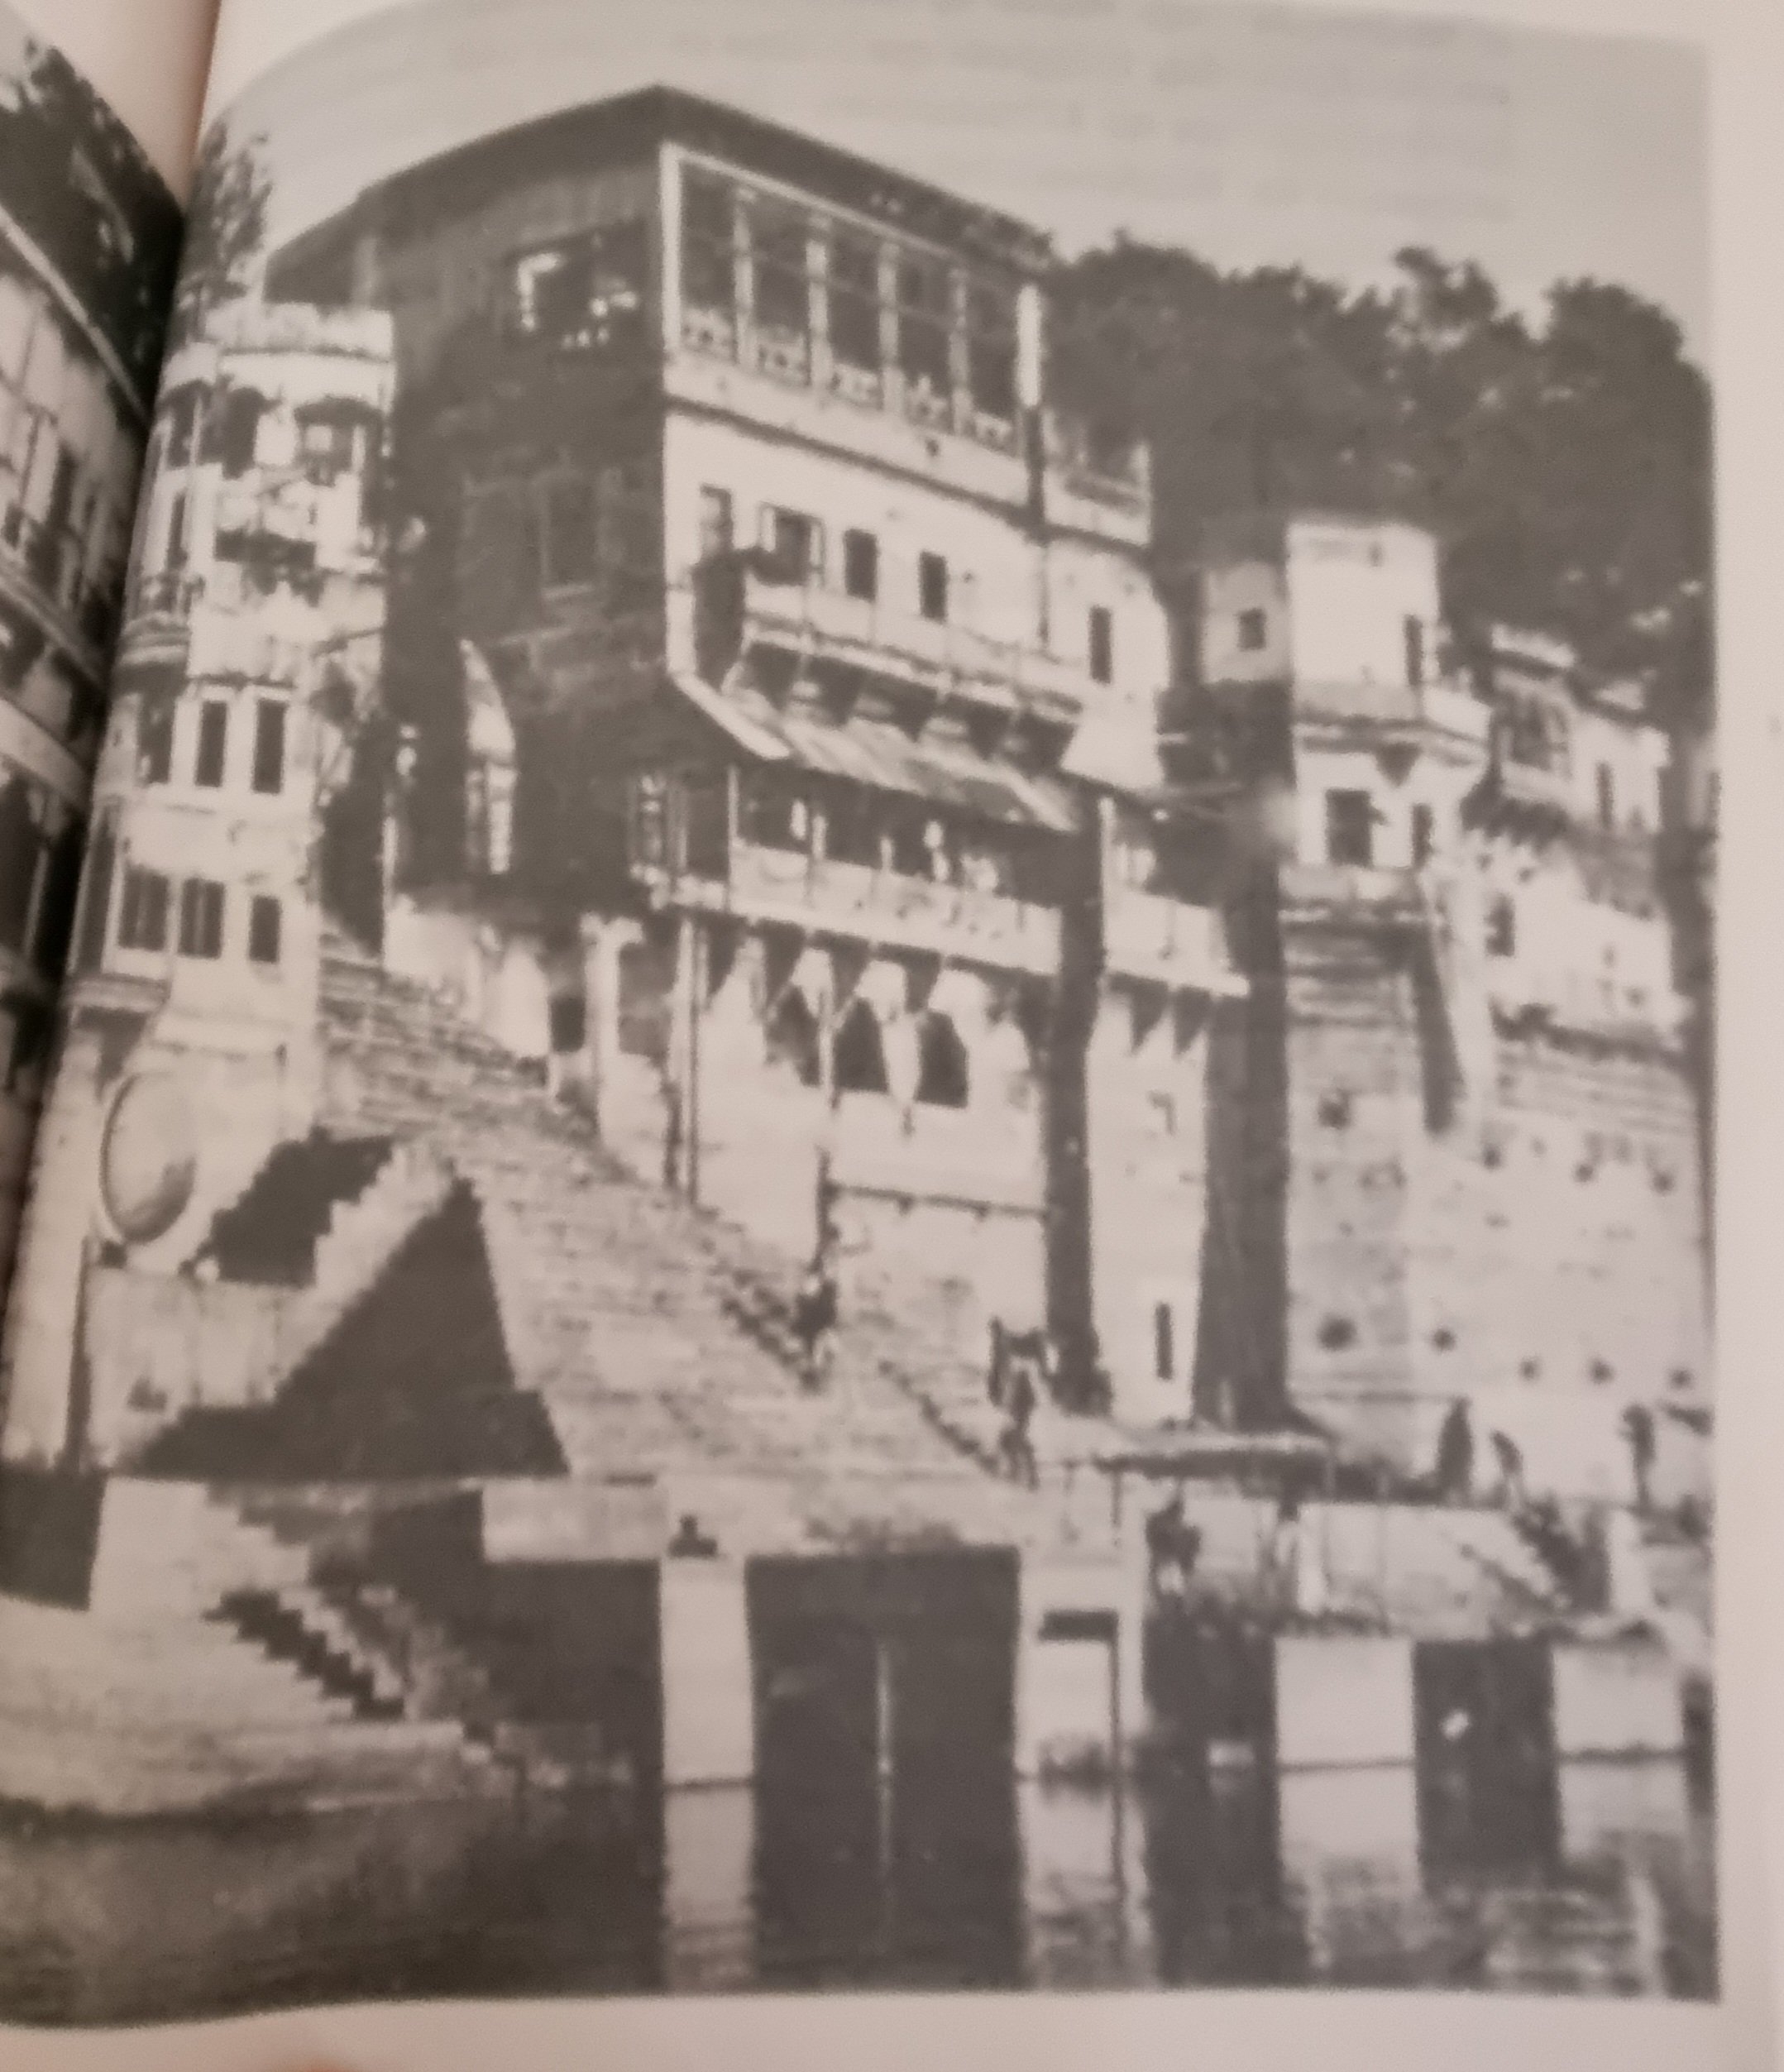 Picture from 'Banaras City of Light' by Diana L. Eck.